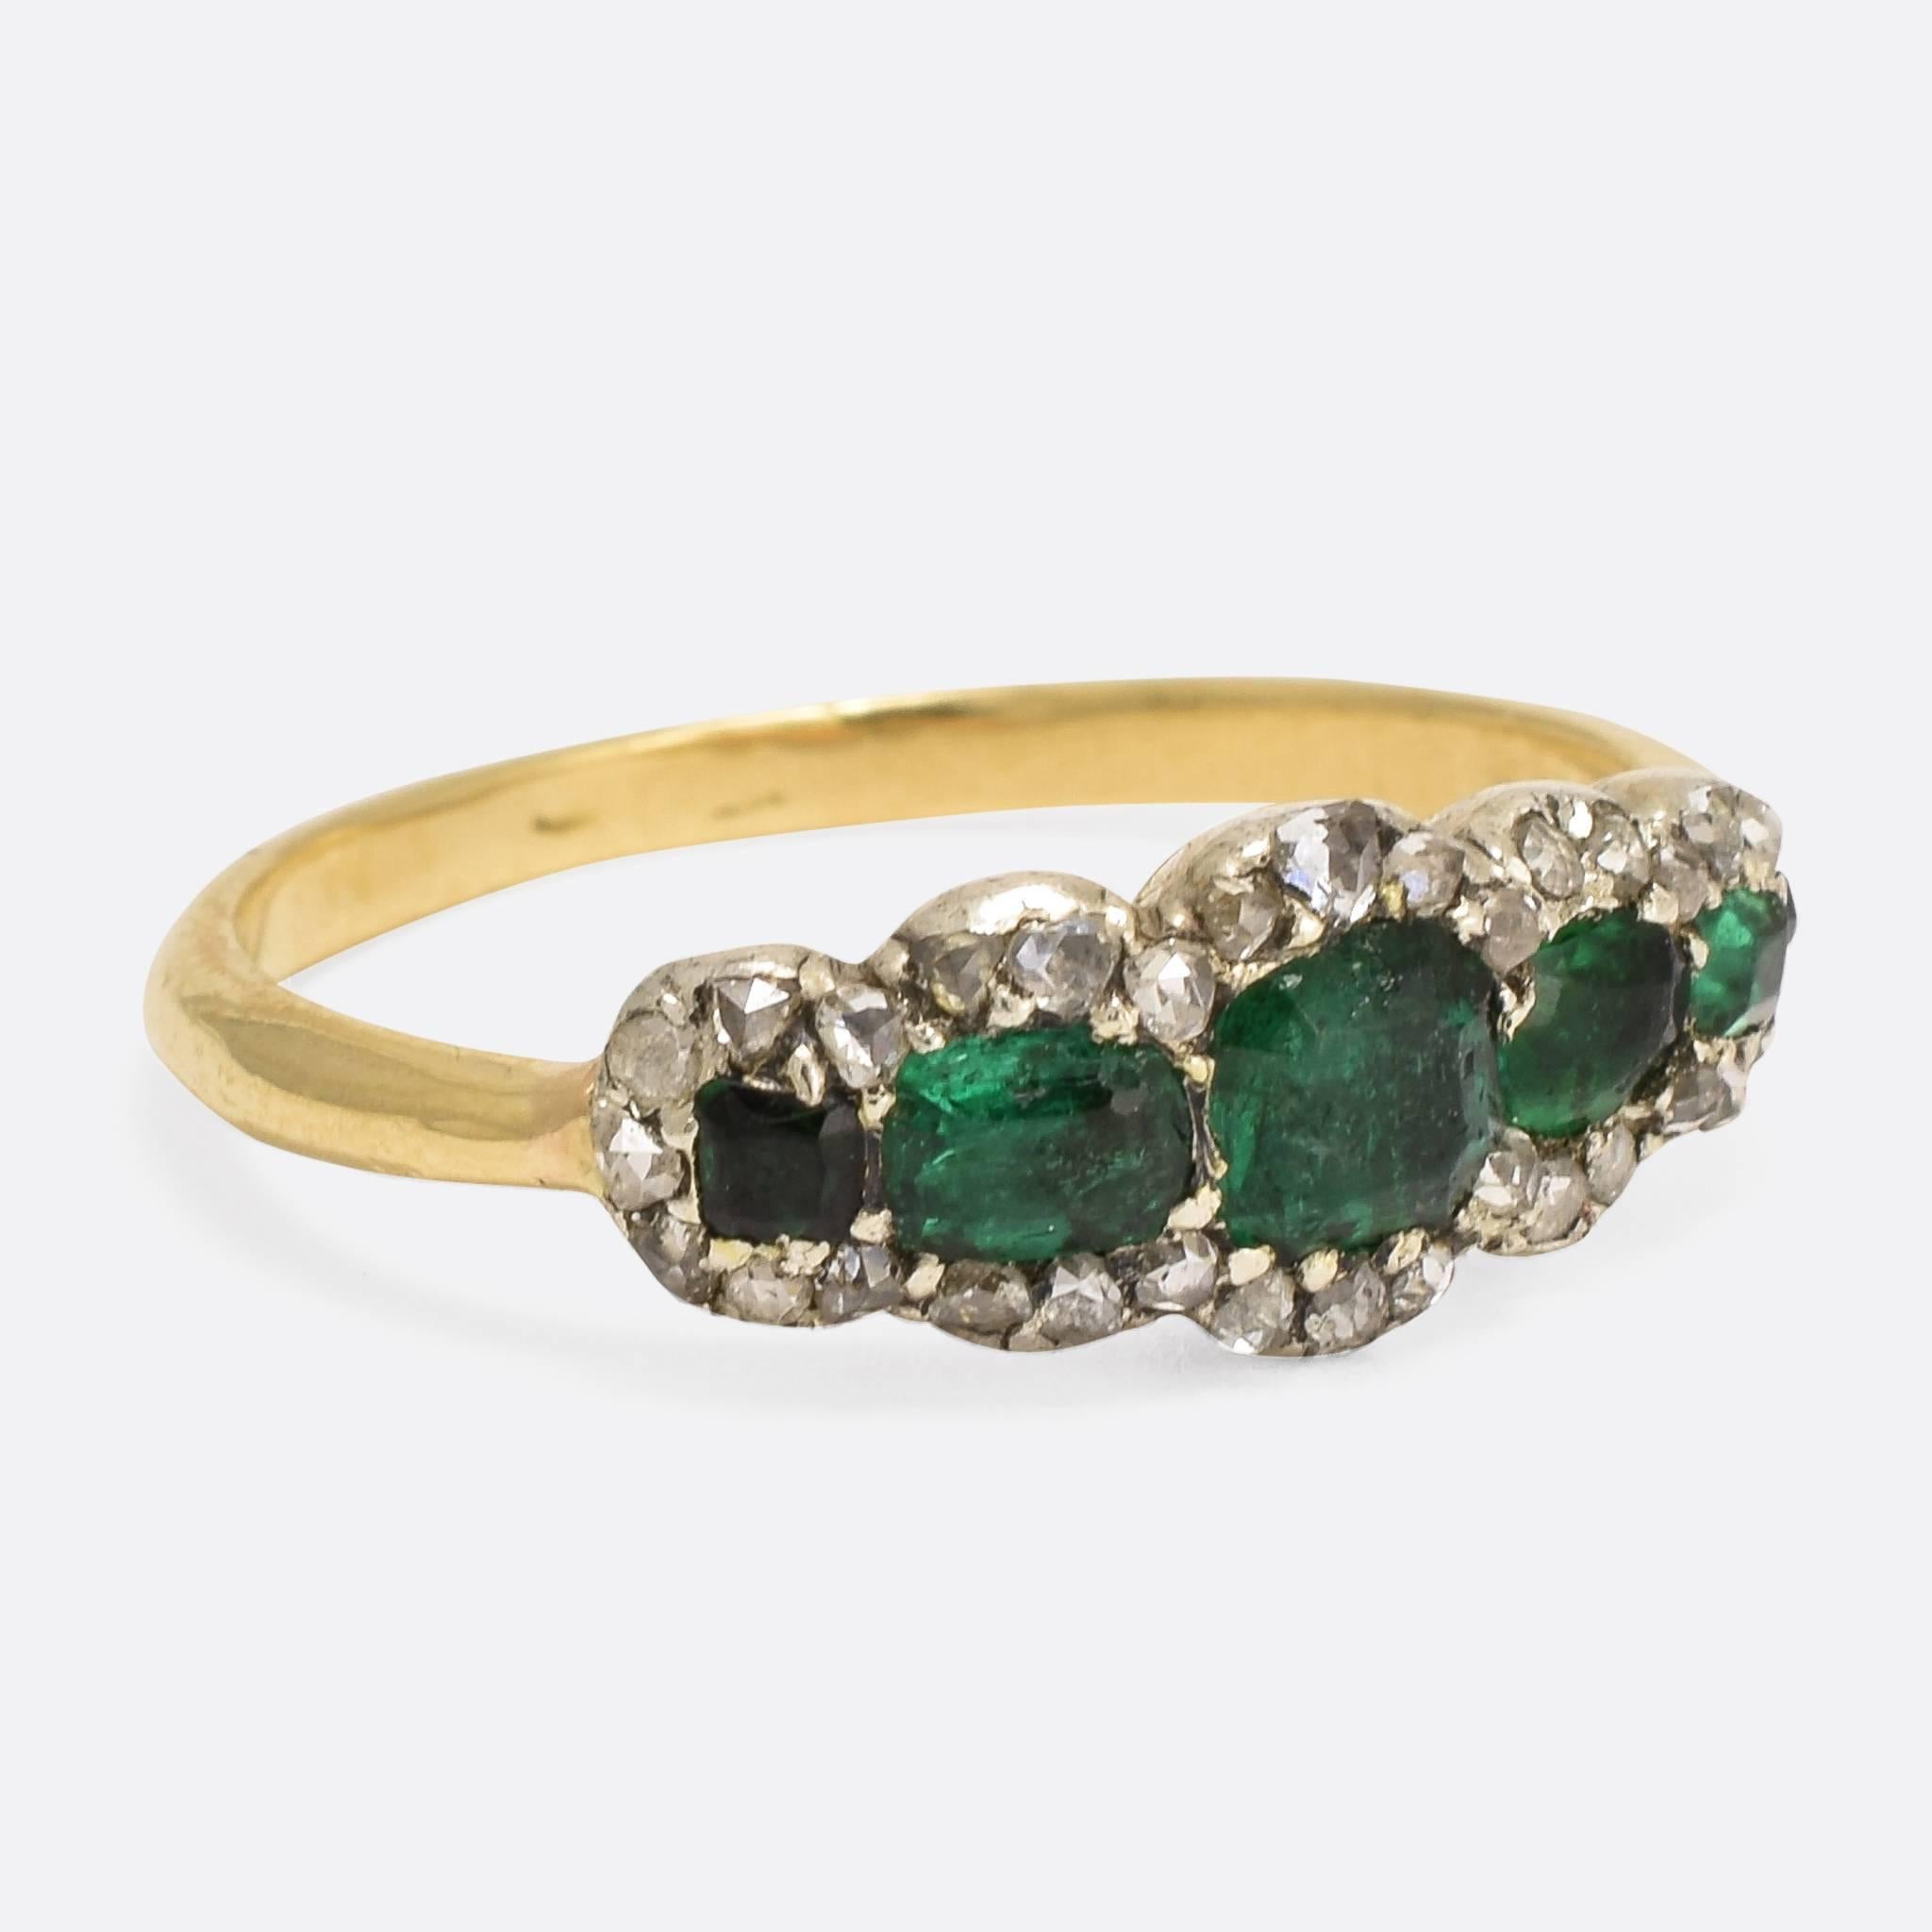 This superb Georgian ring is set with five striking emeralds, set within a cluster of rose cut diamonds - all resting in closed backed settings. It dates to c.1830, modelled in 15ct gold and silver. An exceptionally stylish early 19th Century Ring.